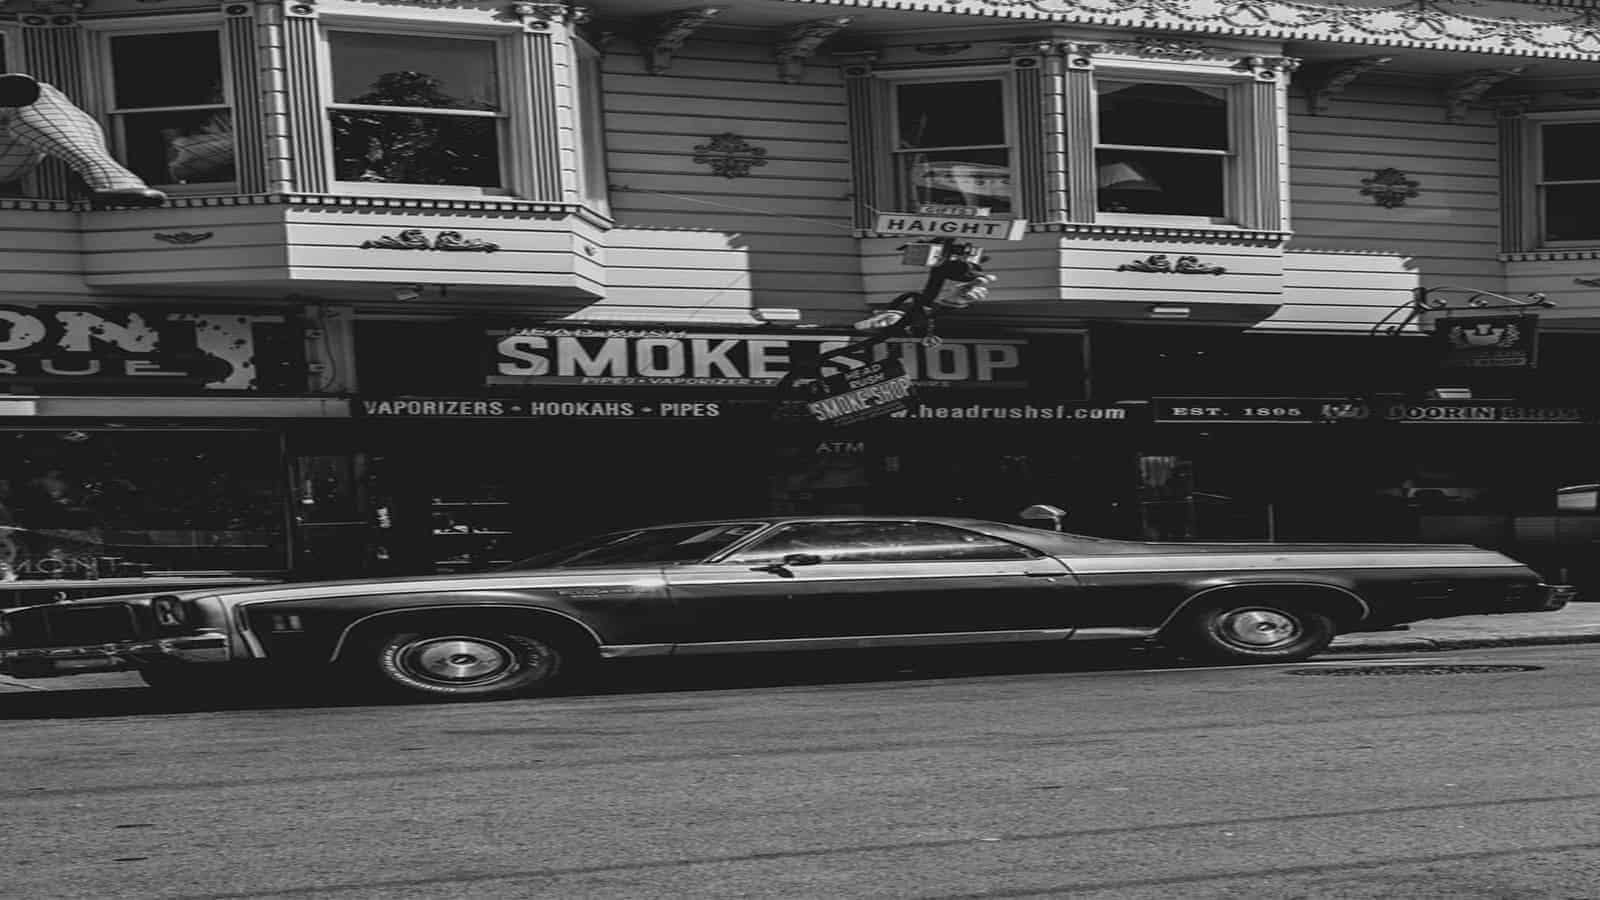 Photo of a smoke shop in black and white